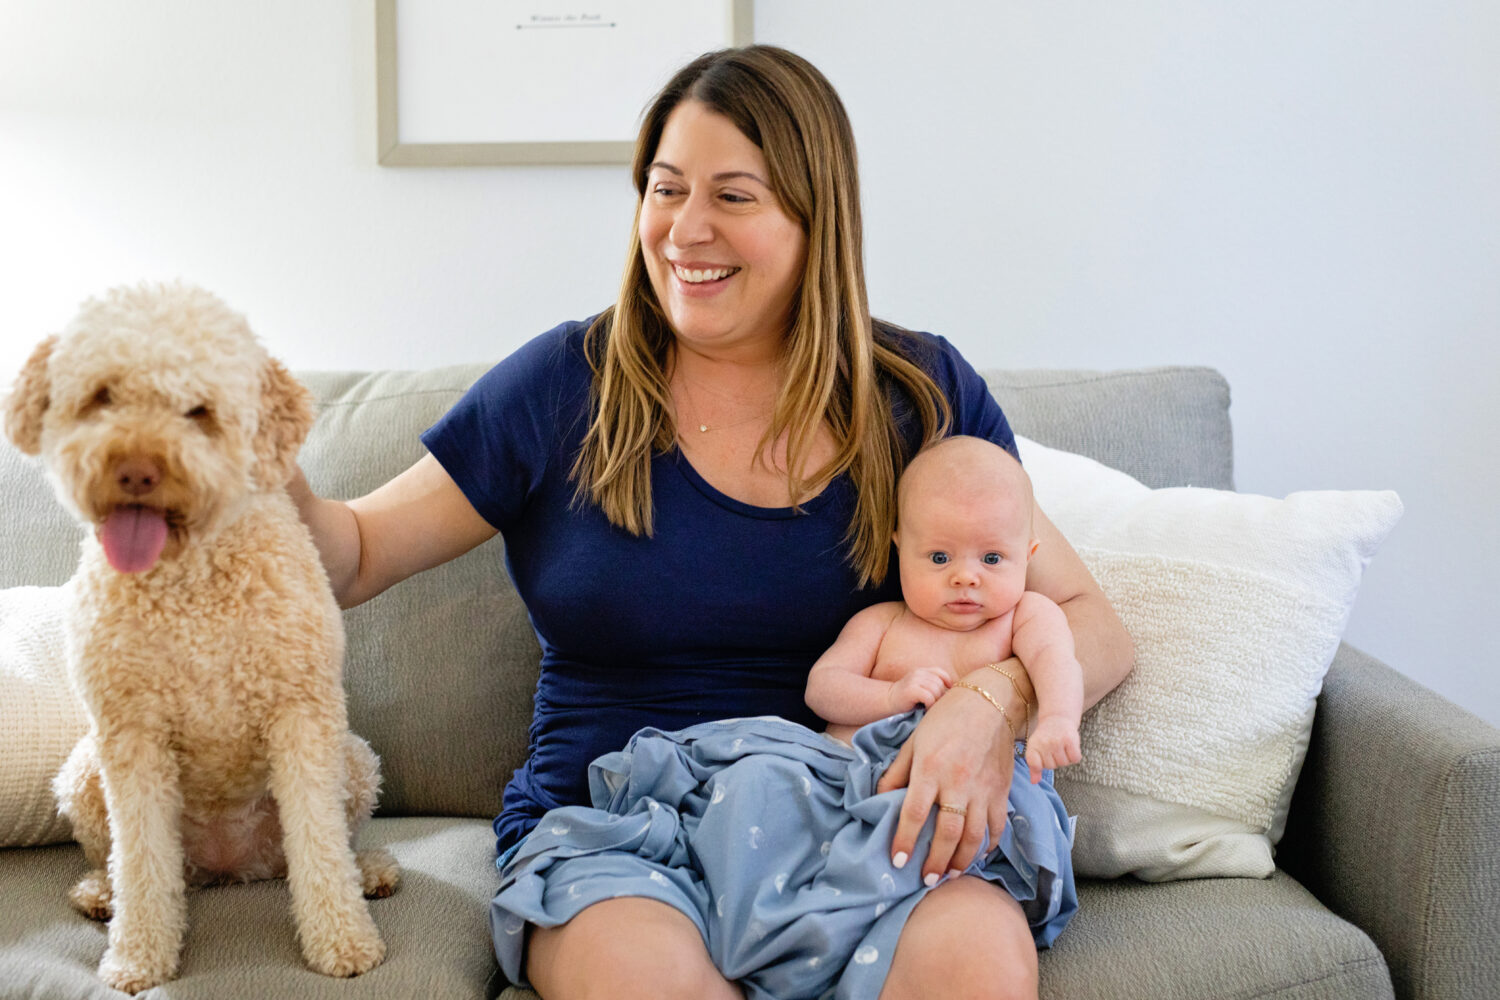 Mom, baby and dog on a couch smiling